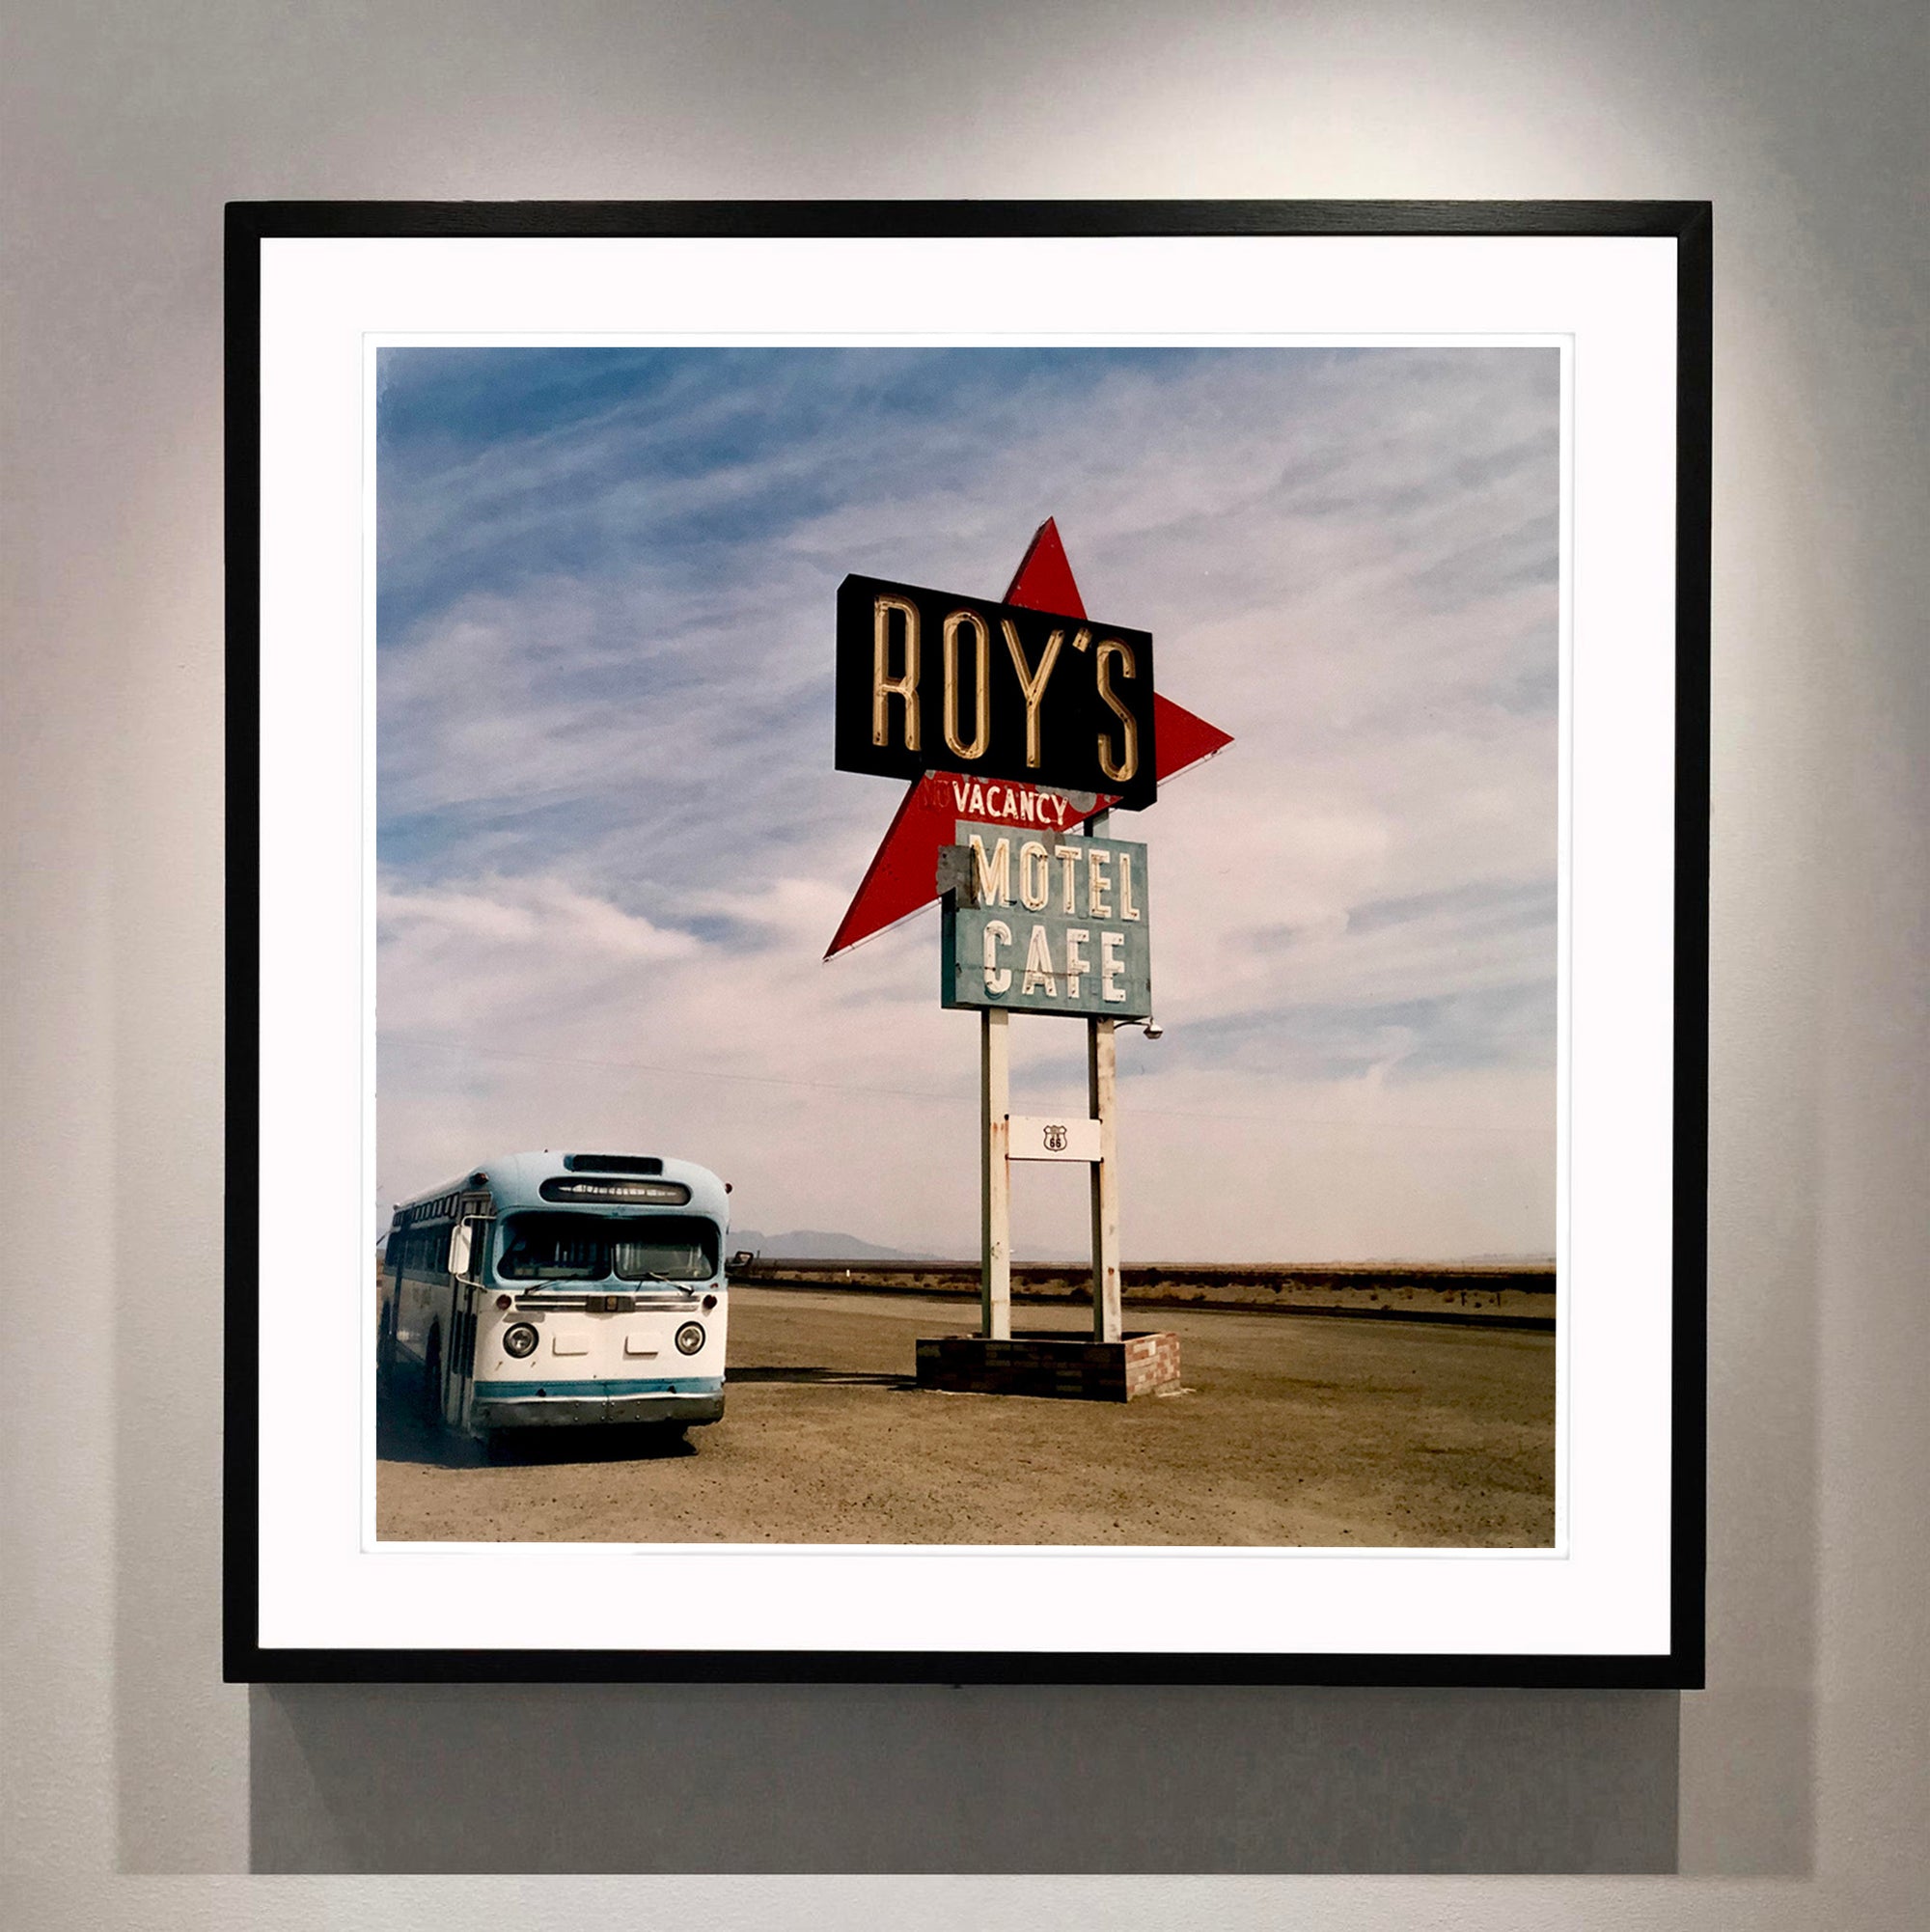 'Bus - Roy's Route 66', part of Richard Heeps 'Dream in Colour' series. This is one of Richard's classic American signs artworks, photographed at the iconic Roy's Motel on Route 66, Amboy, California, featuring the famous 1960's GM Bus.